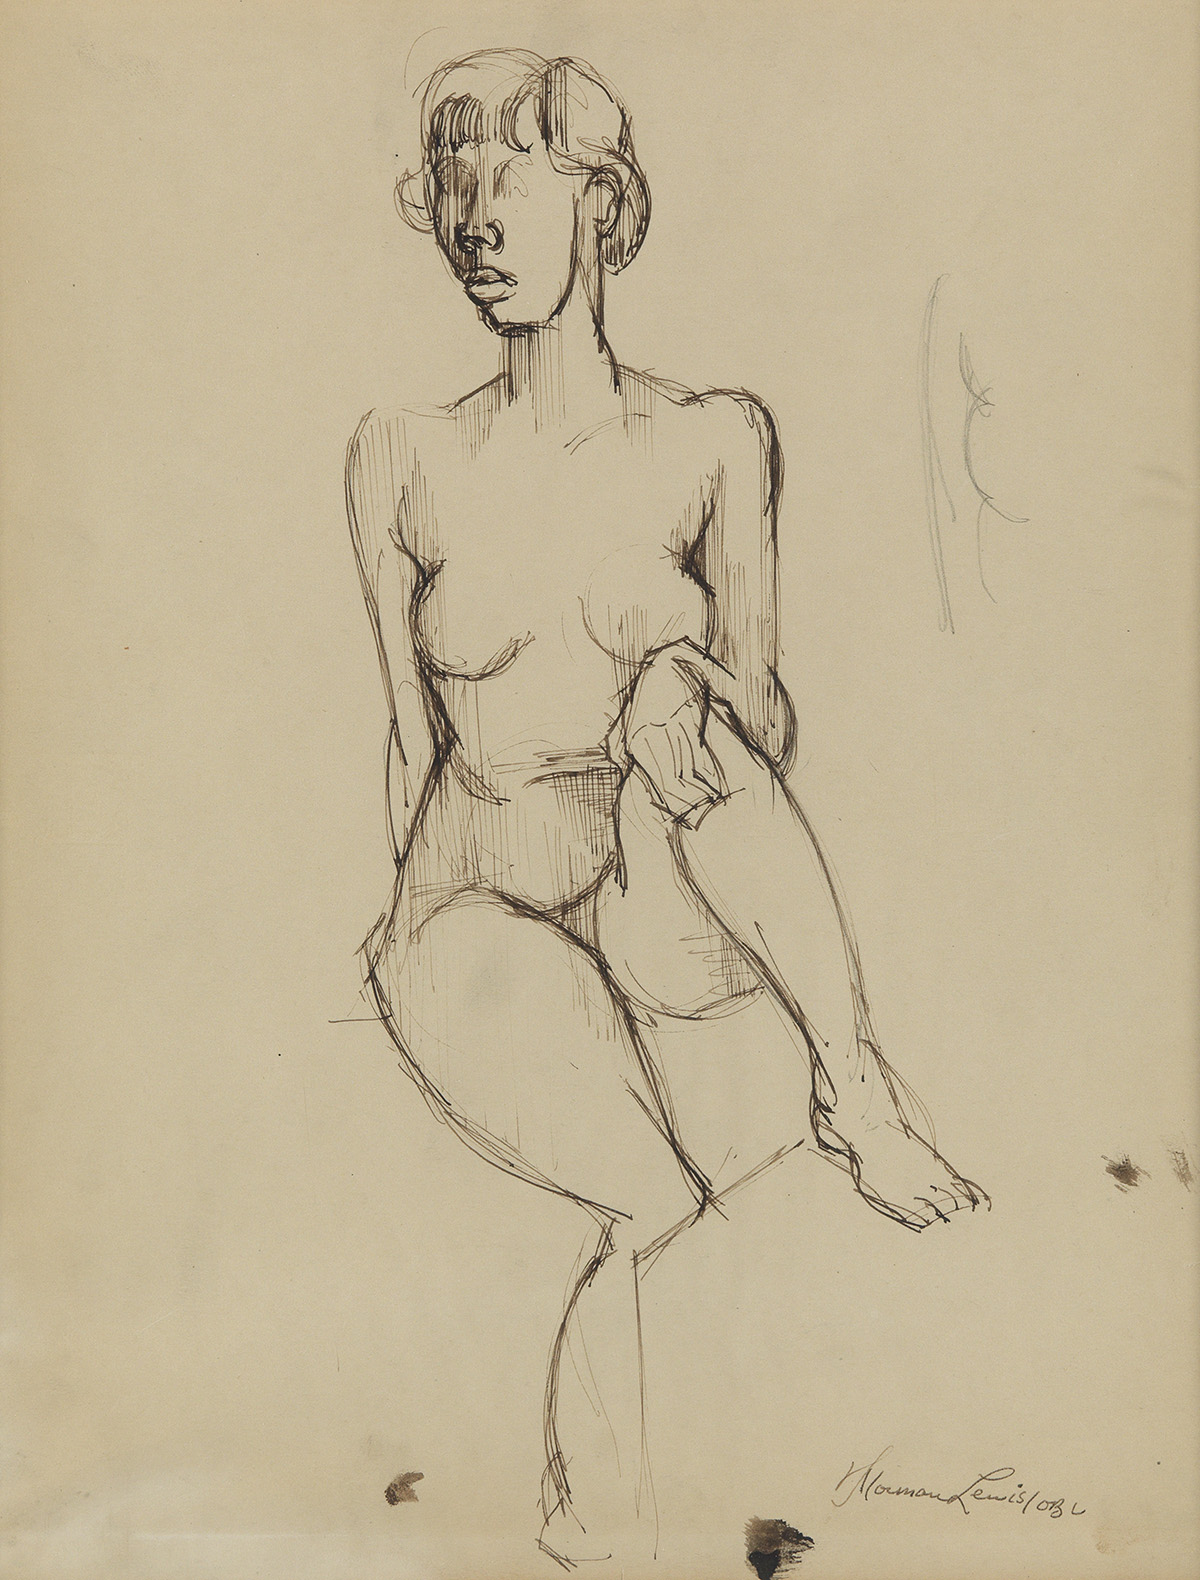 NORMAN LEWIS (1909 - 1979) Untitled (Nude Sketch).